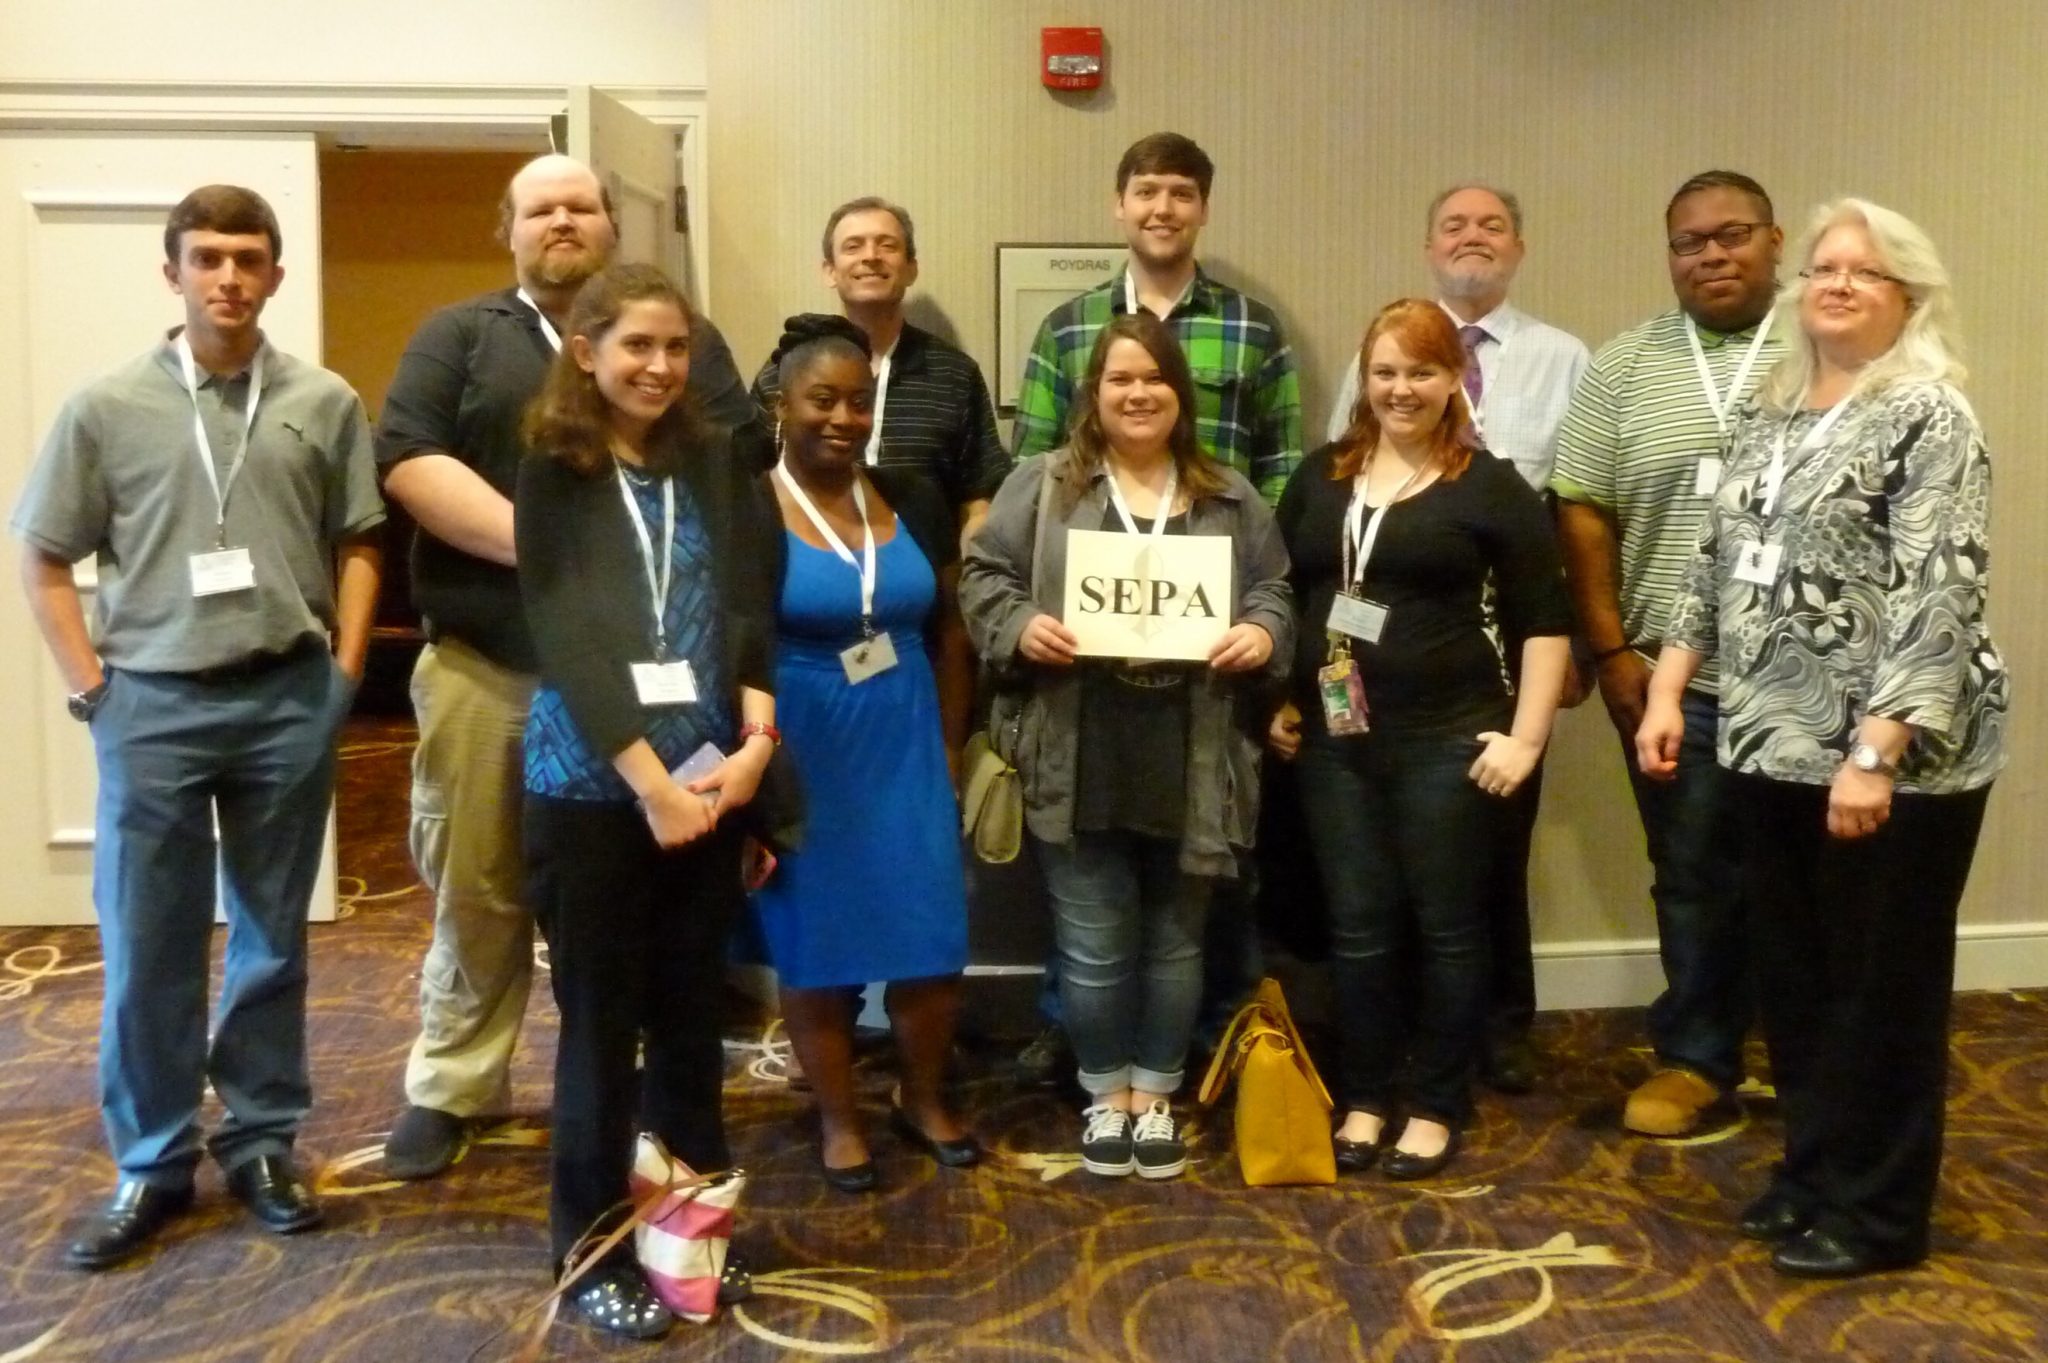 As I said earlier, I've been at Delta State since 2014, and have gotten to do some really fun things in that time. Last spring we took a group of Psychology students down to New Orleans for the Southeastern Psychological Association meeting (SEPA). Pictured here are the students, along with a few other DSU faculty (Drs Zengaro, Beals, and Zengaro).